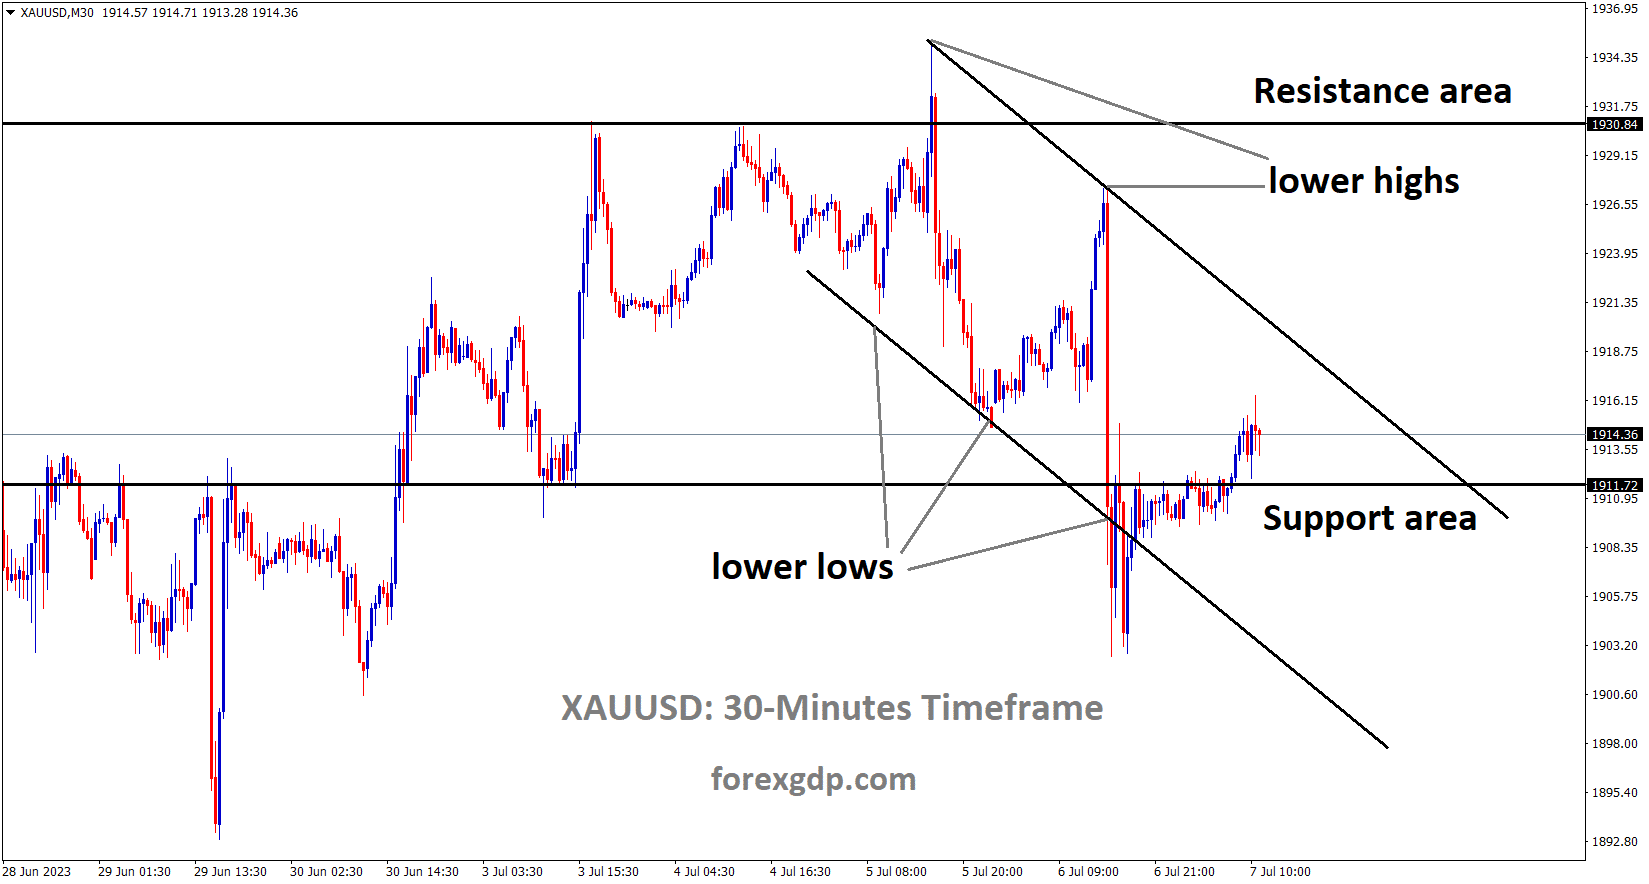 XAUUSD Gold Price is moving in the Consolidation pattern